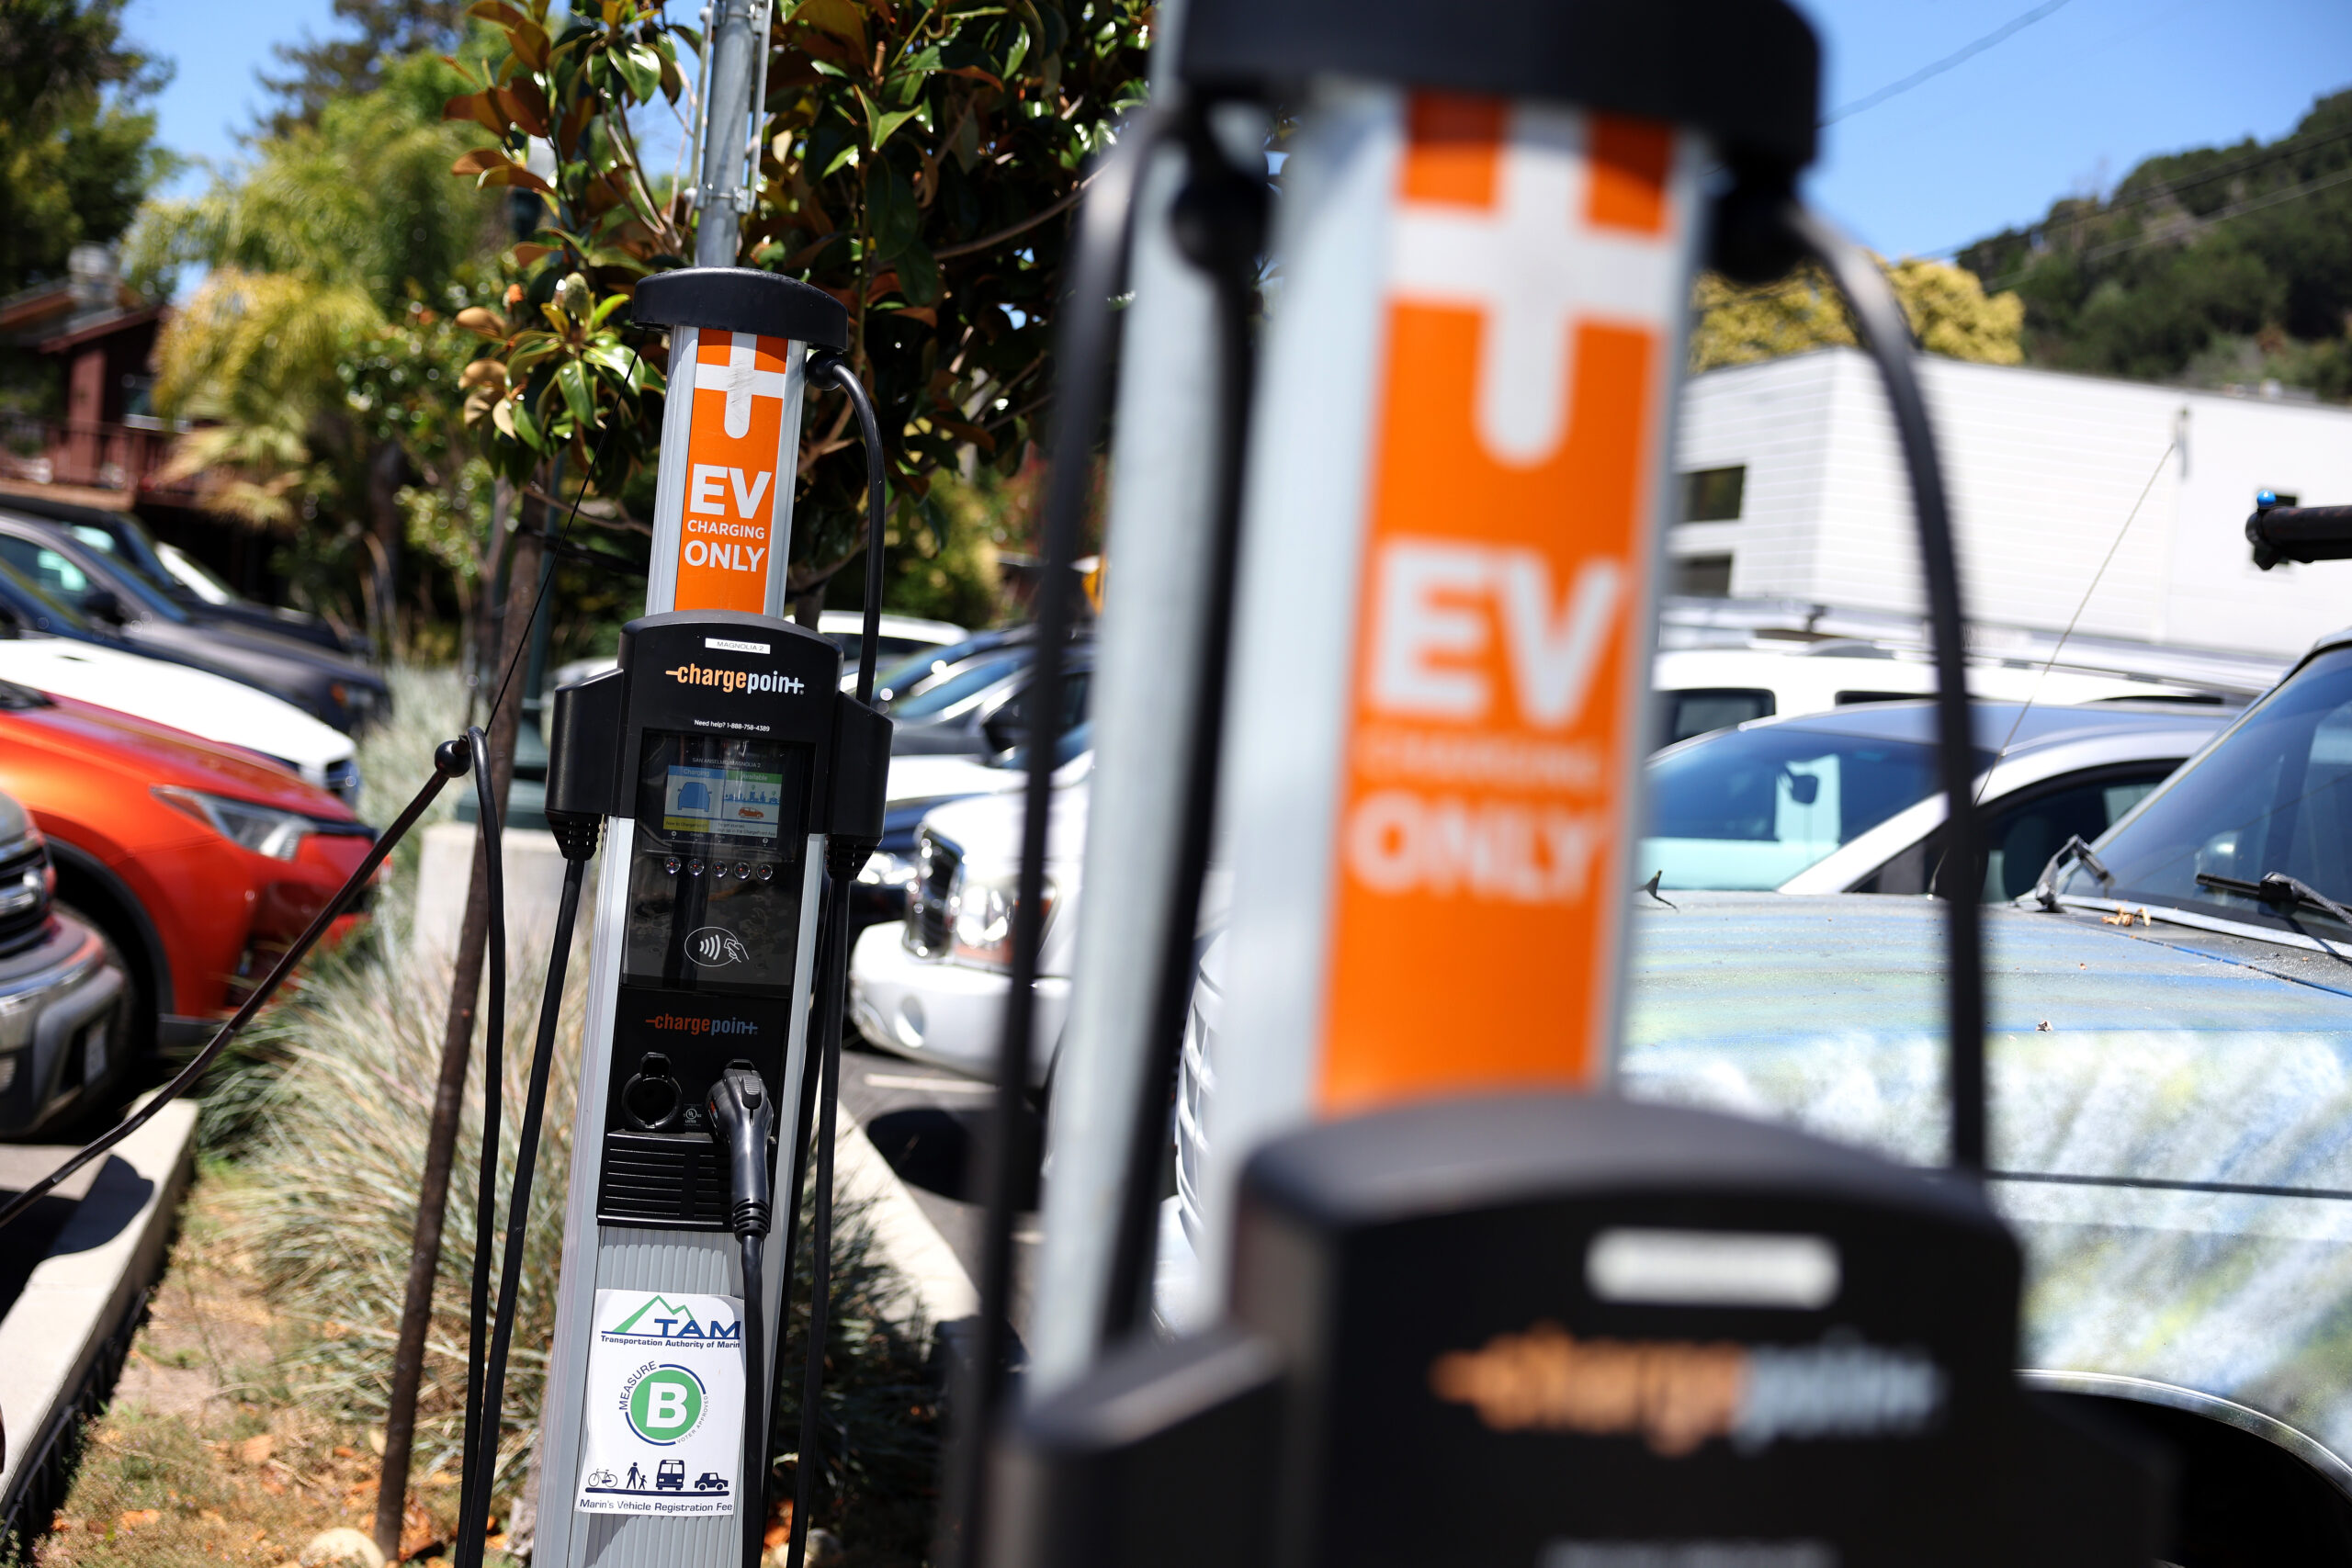 The Republican-controlled Senate approves a measure to revoke the EV charger regulation.